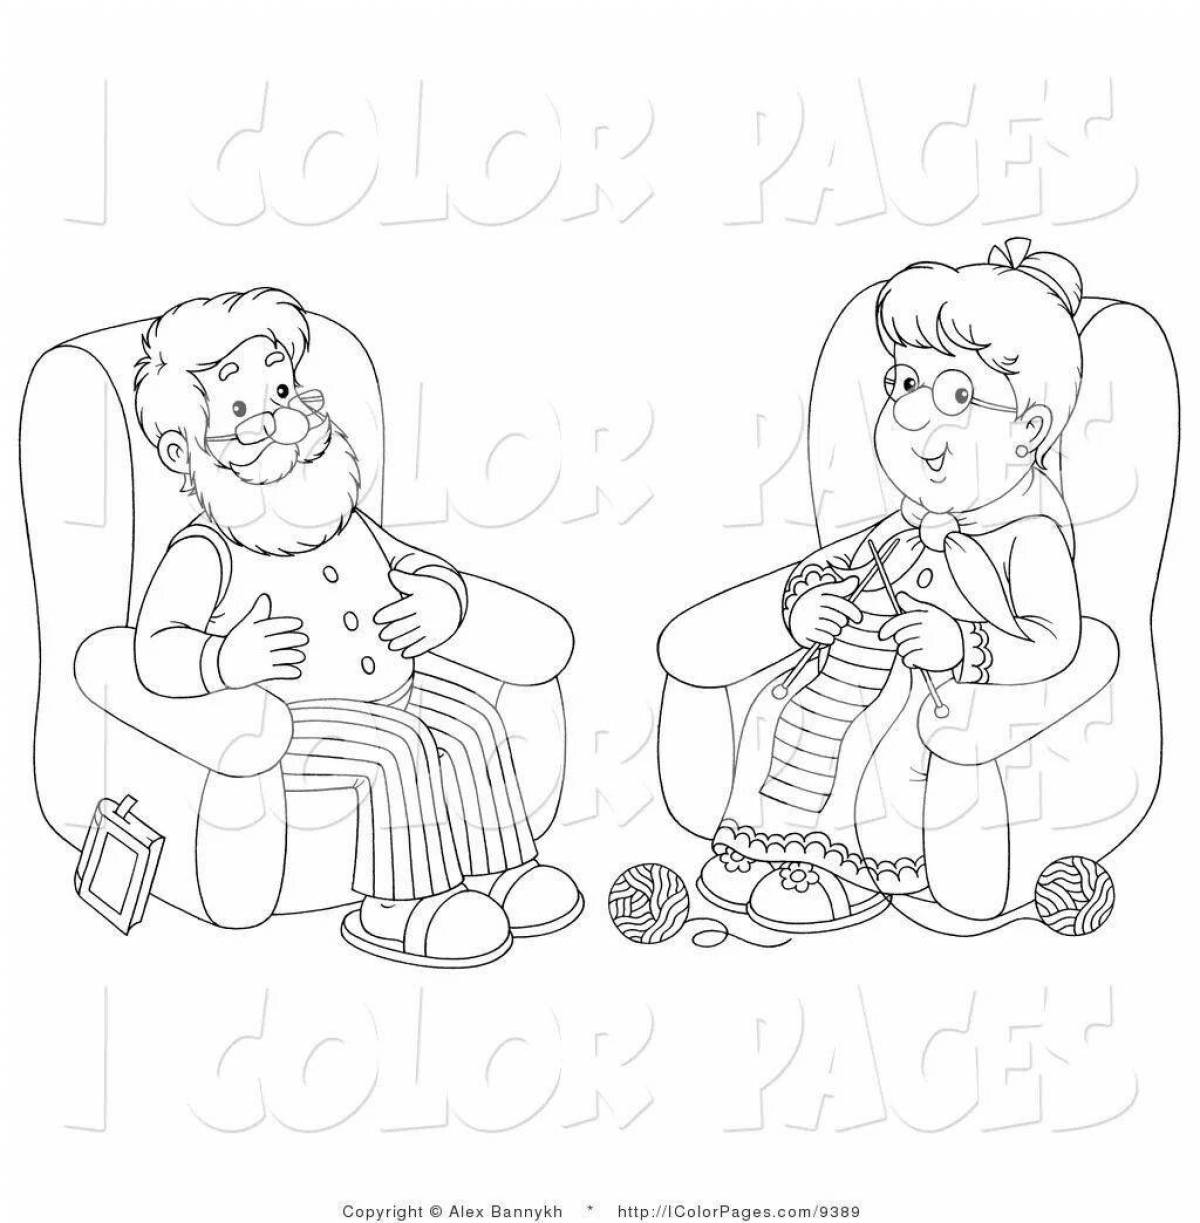 Cute grandparents coloring pages for kids